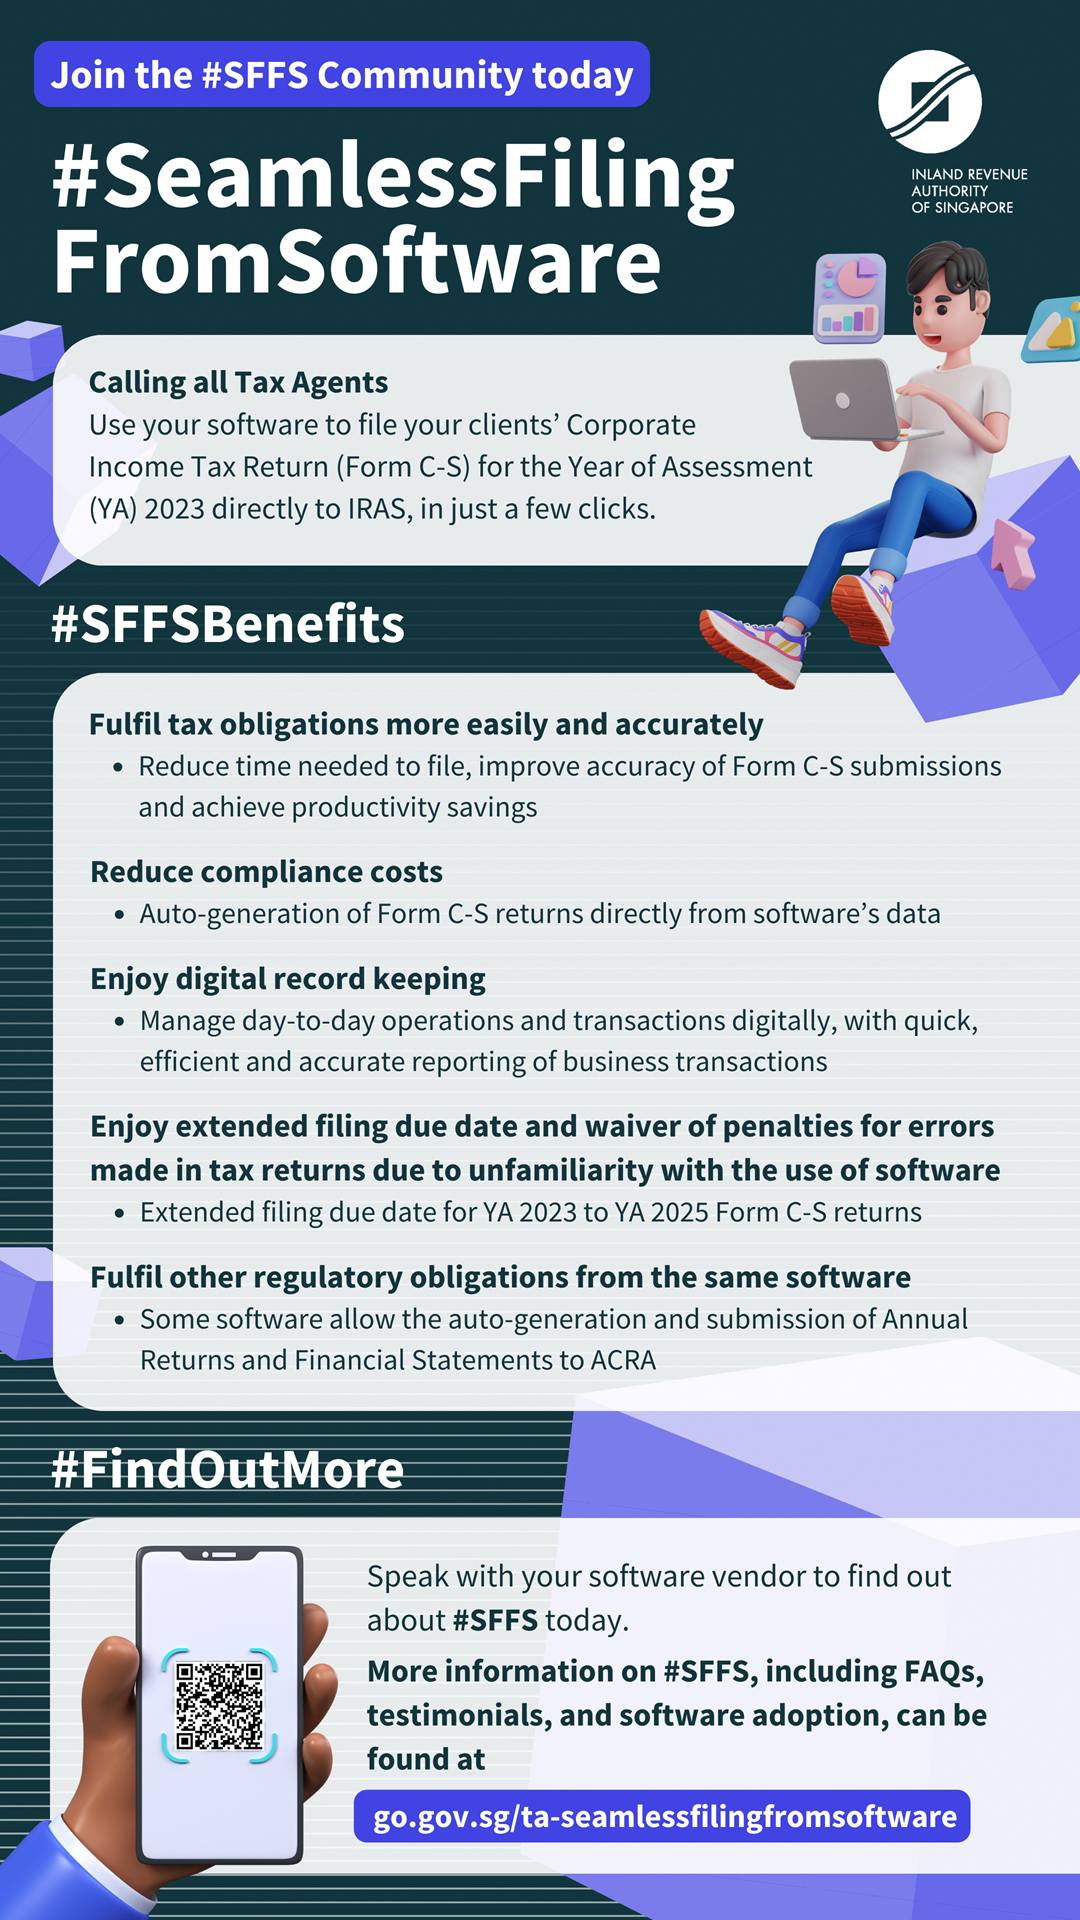 File Tax Returns Directly to IRAS with #SeamlessFilingFromSoftware (#SFFS) for Tax Agents